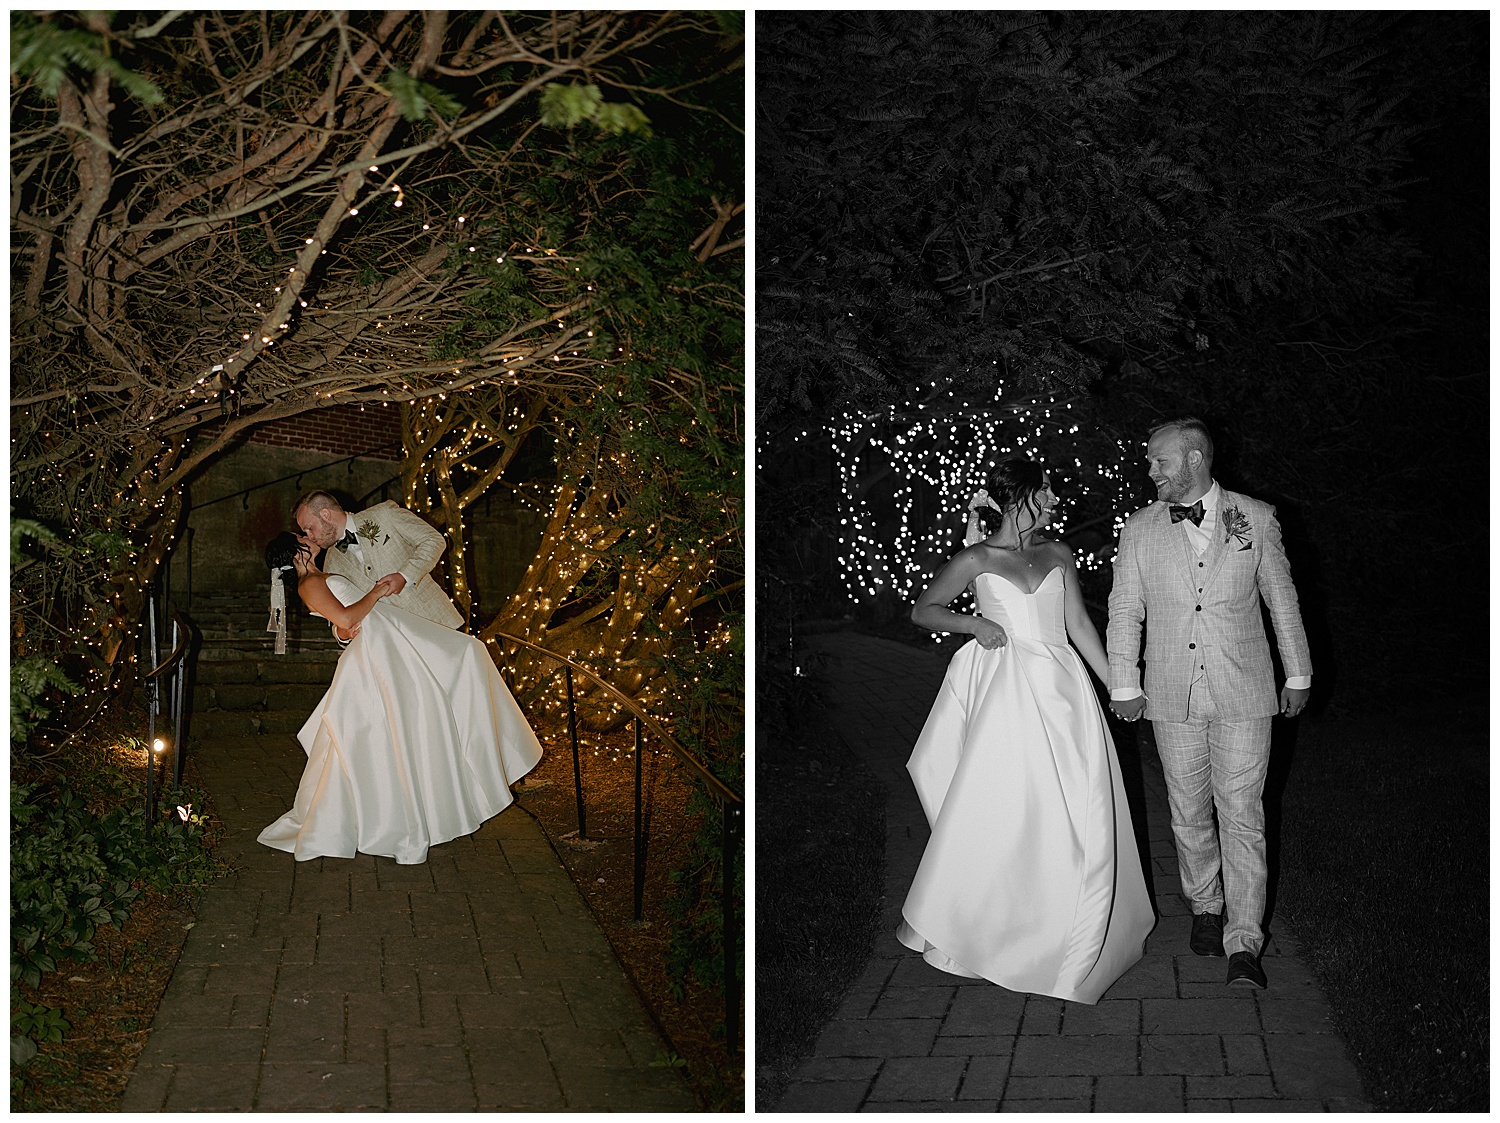 Direct flash photos with bride and groom during wedding reception